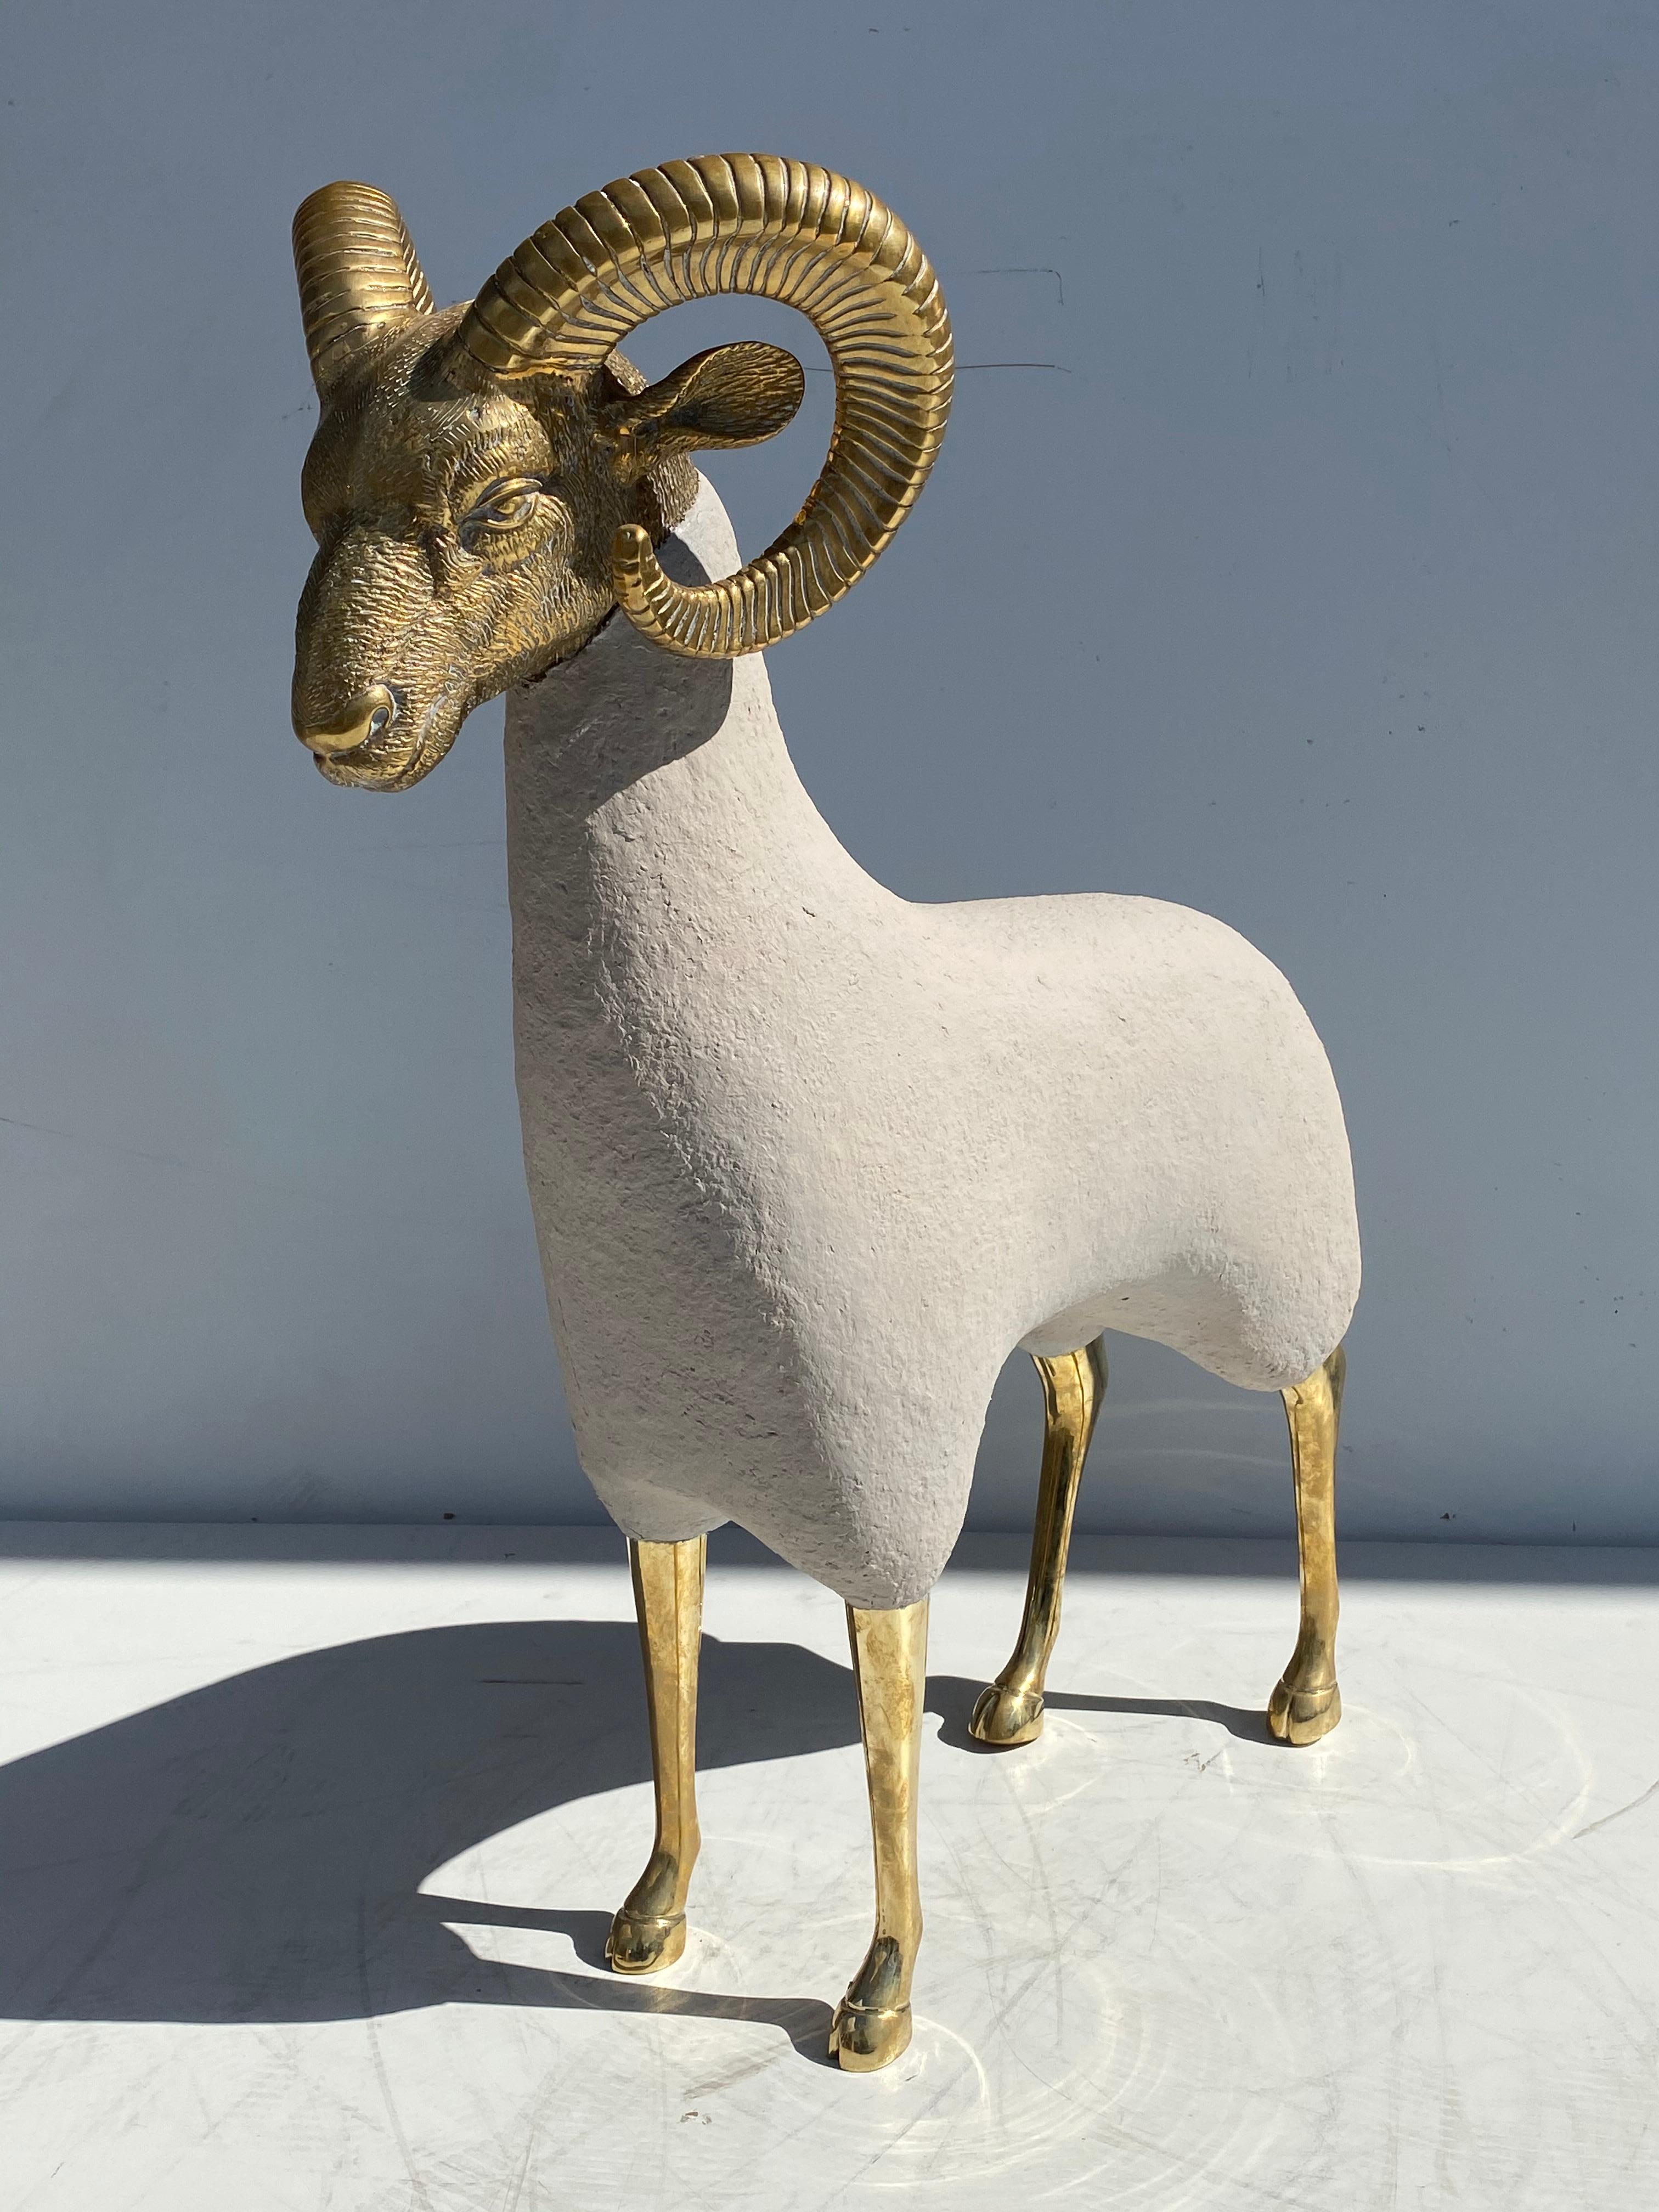 Brass ram or mountain sheep sculpture in faux concrete in the style of Lalanne.